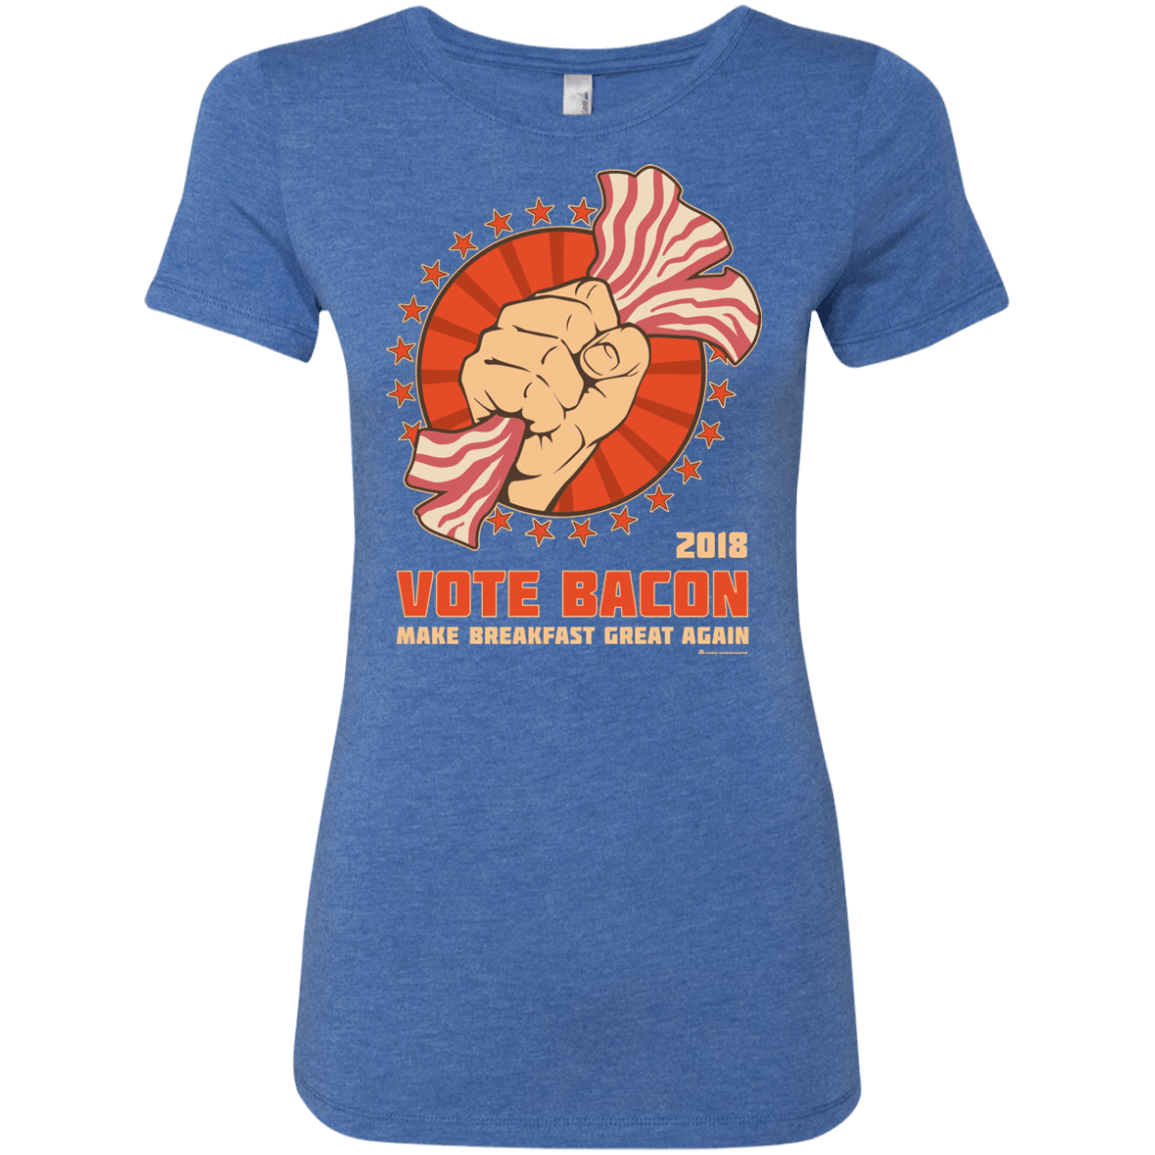 T-Shirts Vintage Royal / Small Vote Bacon In 2018 Women's Triblend T-Shirt